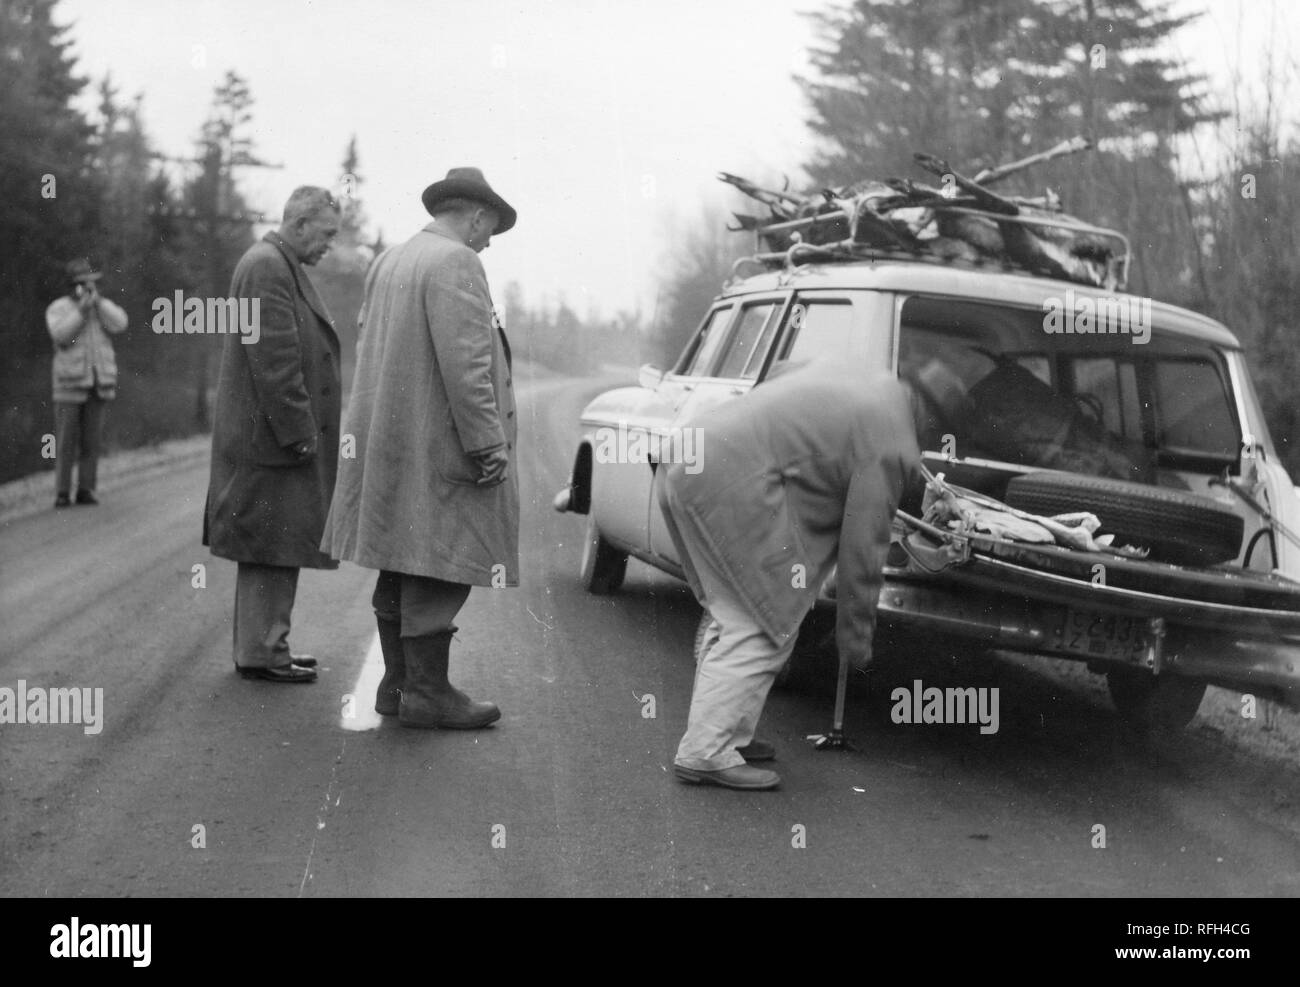 Black and white photograph of four men, each wearing a coat or jacket, standing on an empty stretch of road with a parked station wagon that has the bodies of several deer in its overhead rack; a man in the right foreground appears to change a rear tire while two men watch, the fourth man films or photographs the proceedings from the left background; with conifers and other trees visible in the background, photographed during a hunting and fishing trip located in Alaska, USA, 1955. () Stock Photo